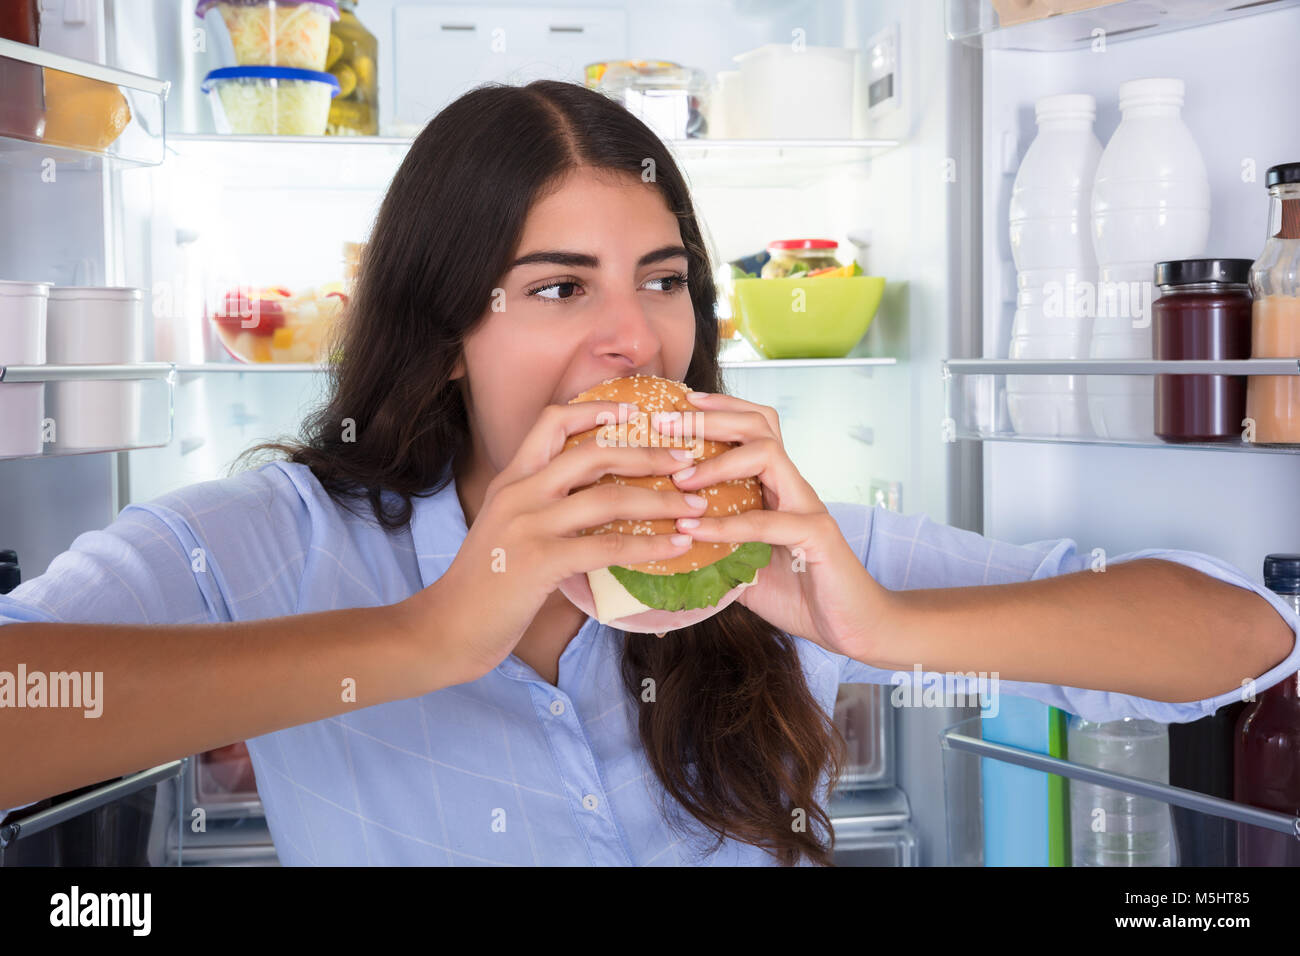 Portrait Of A Young Happy Woman Eating Burger Stock Photo